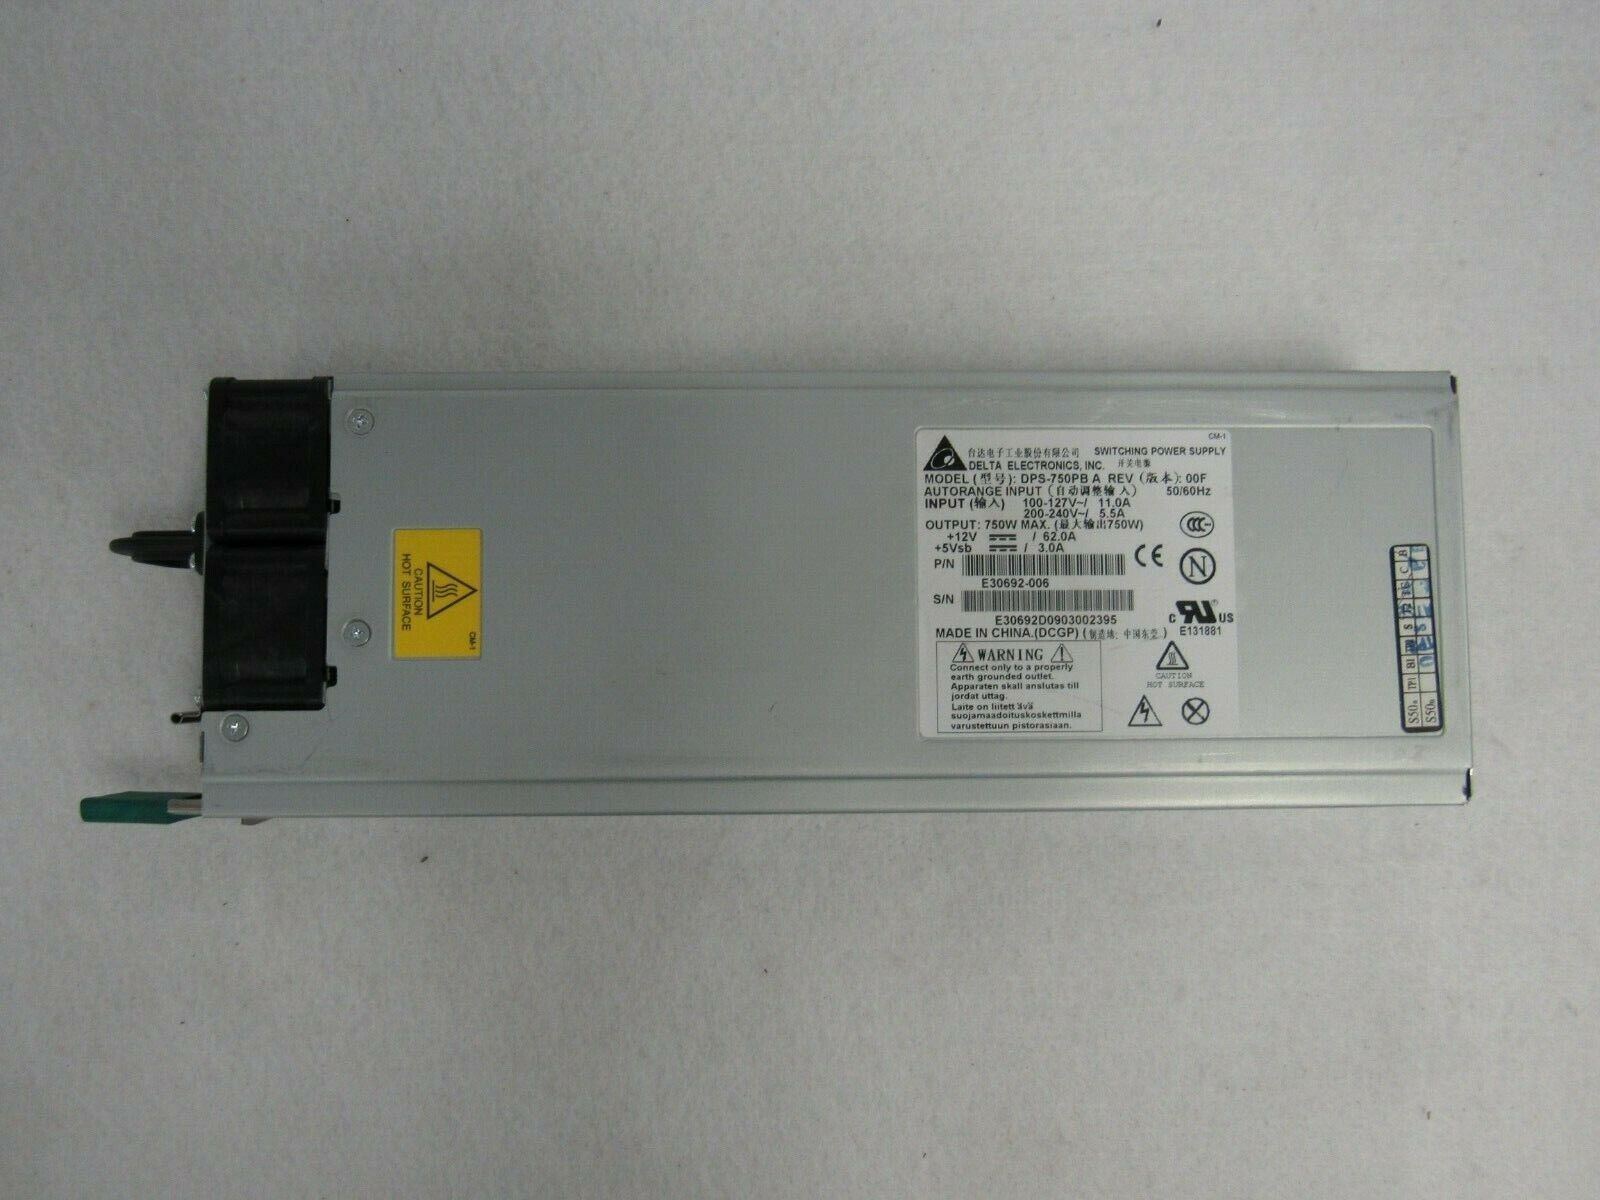 Delta 750W Switching Power Supply DPS-750PB A REV: 00F, P/N: E30692-006 4-3